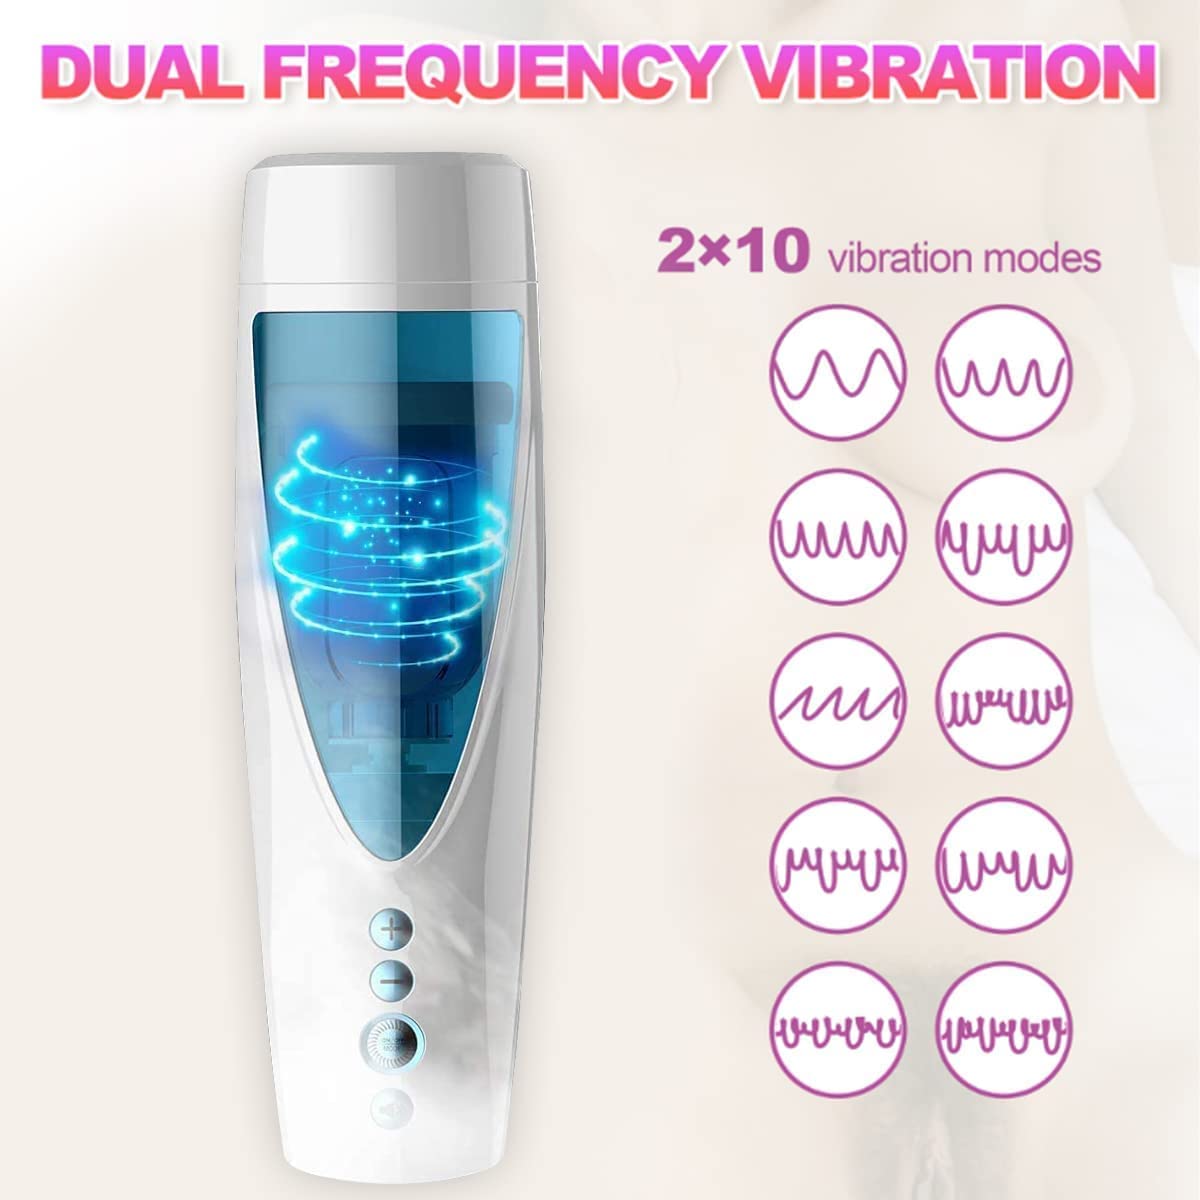 Sex Toys for Men Vibrating Machine Hands Free - 2021 New Masterbrators for Men Automatic Blówjobséx Máchine for Men Handsfree Modes Sucking USB Rechargeable Sexy Underwear for Men Sleeve Adult Toys